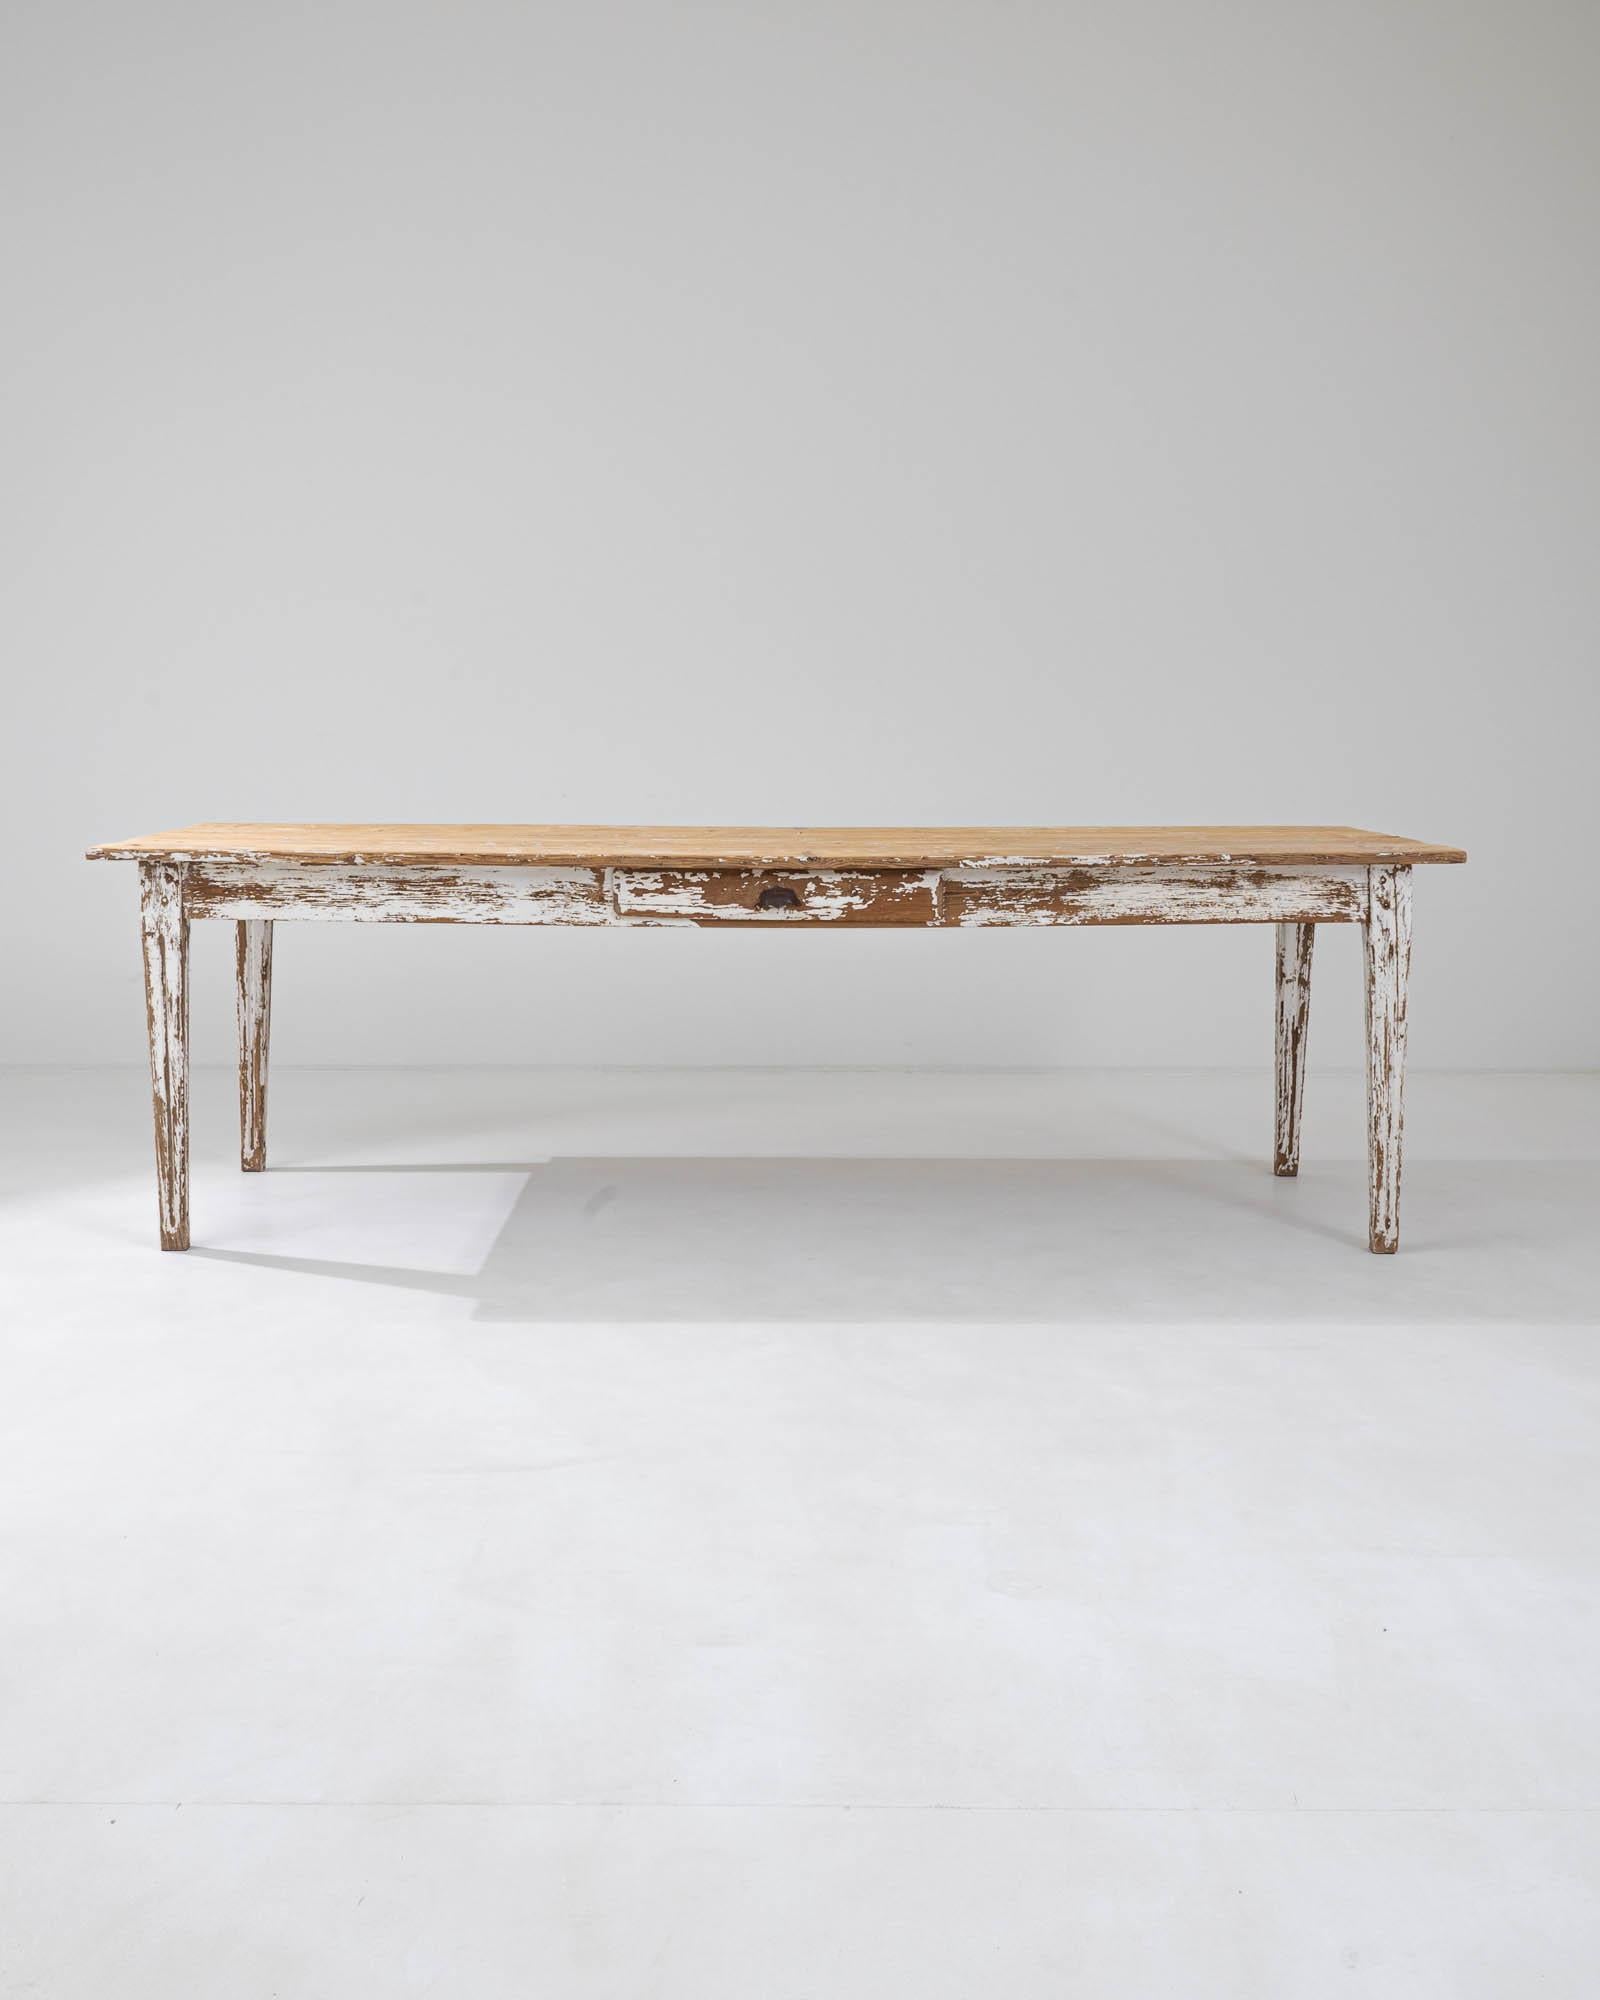 This vintage provincial dining table combines a simple shape with a homey patina for a timeless appeal. Hand-crafted in France in the early 20th century, a long rectangular tabletop sits atop an apron housing a small drawer, perfect for household